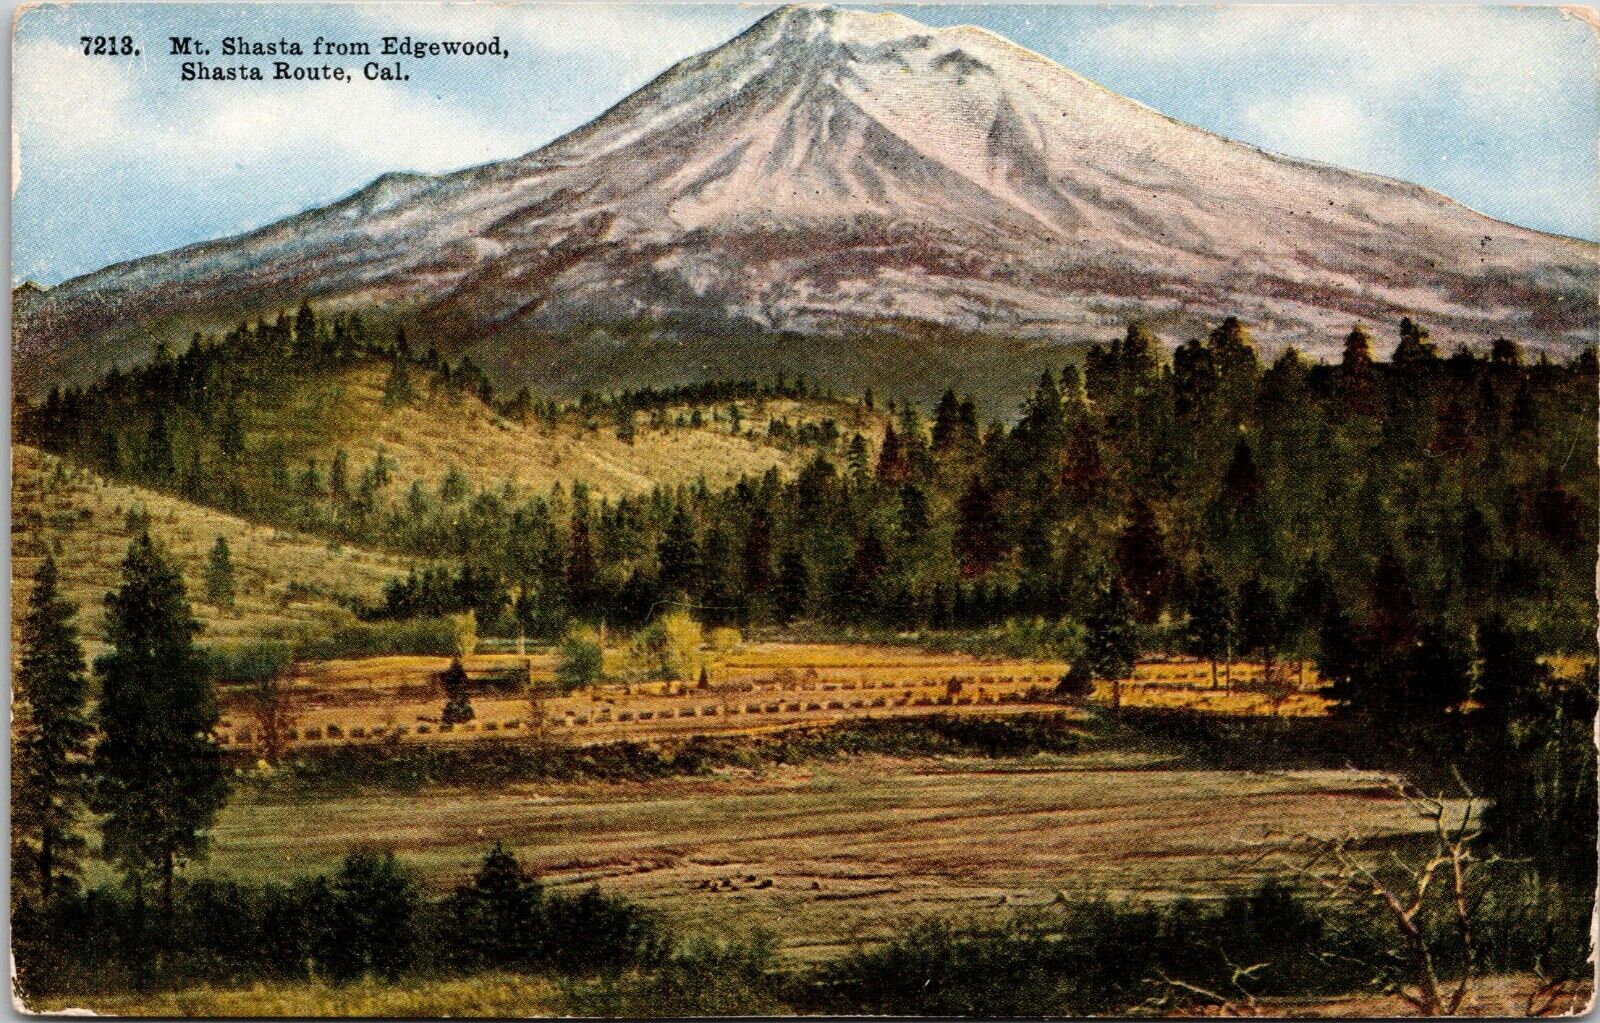 Shasta Route CA California Postcard Mt Shasta from Edgewood Pacific Novelty Card